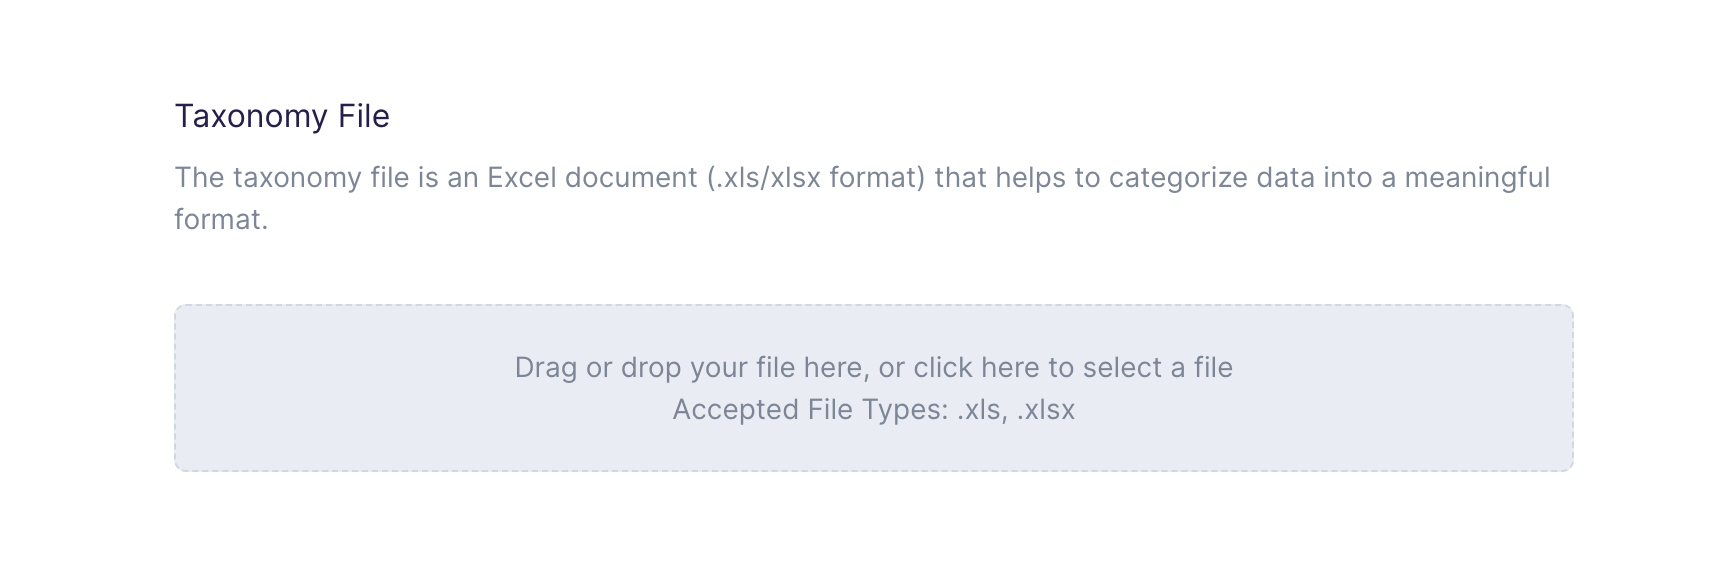 Taxonomy File input in Hightouch